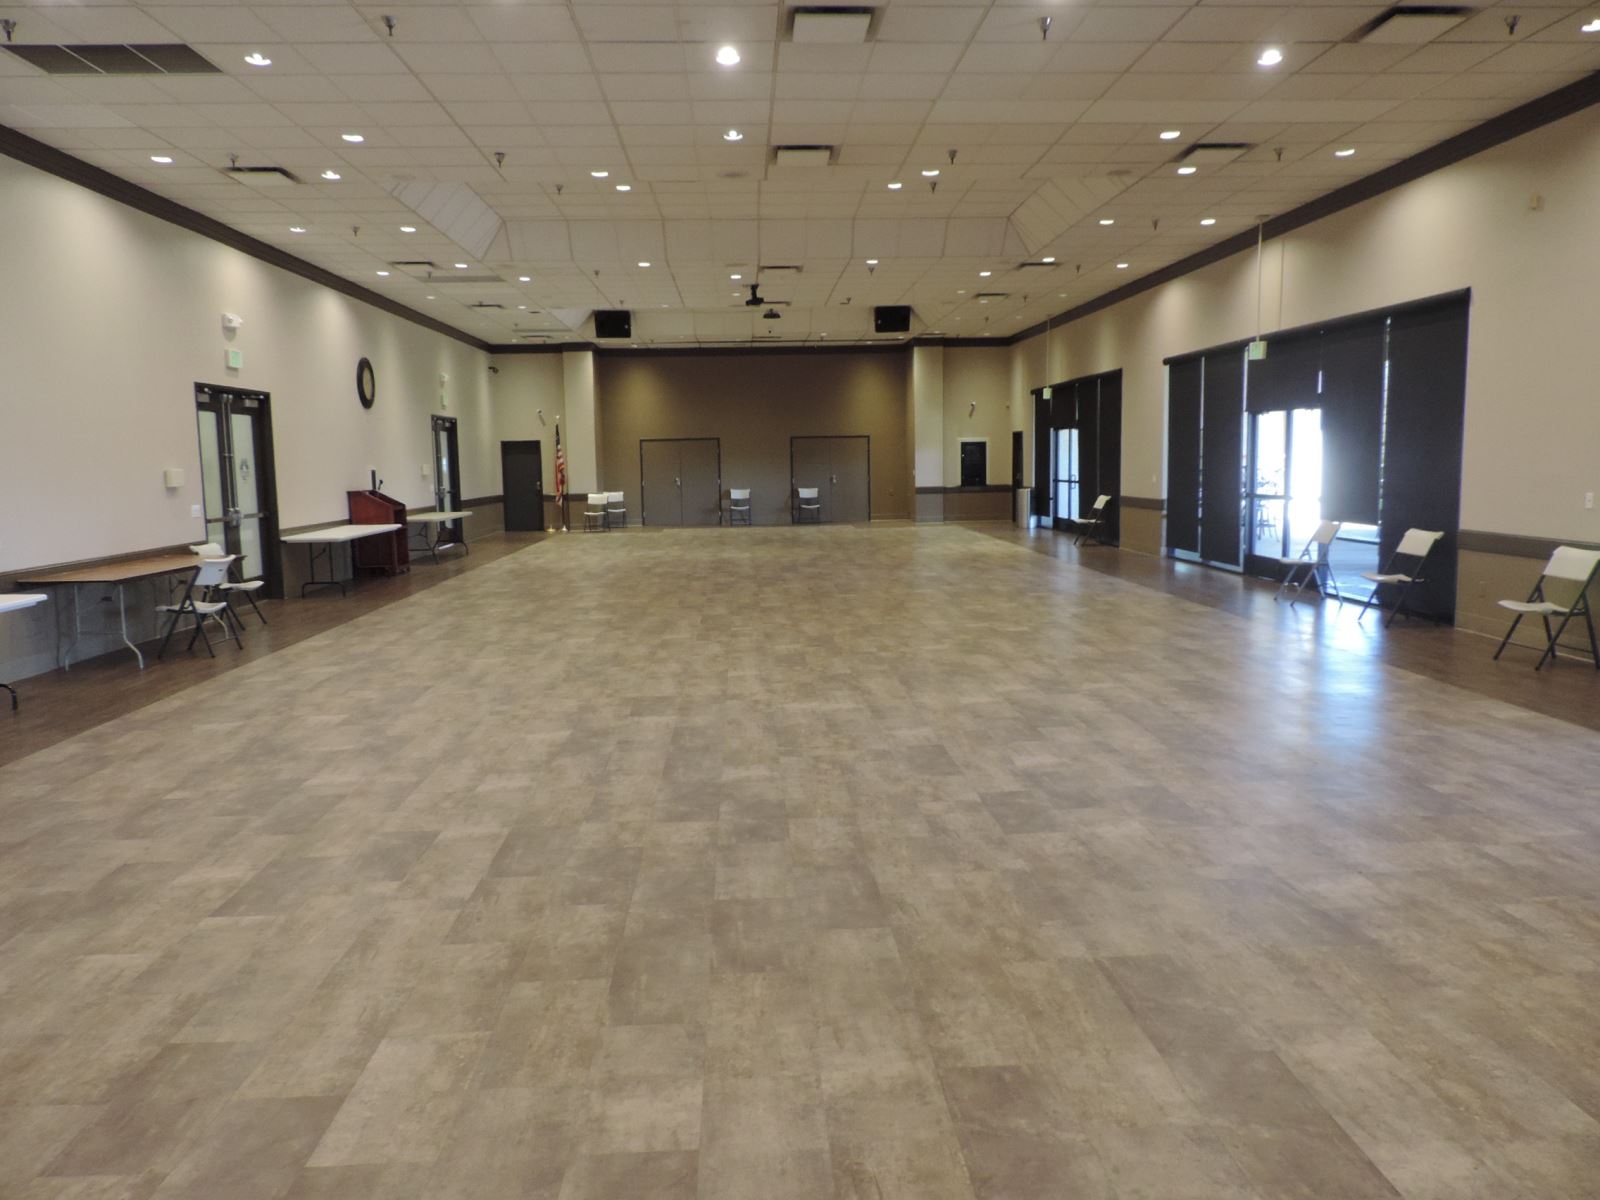 Image of Community Center Large Banquet room, Meadowlark Hall